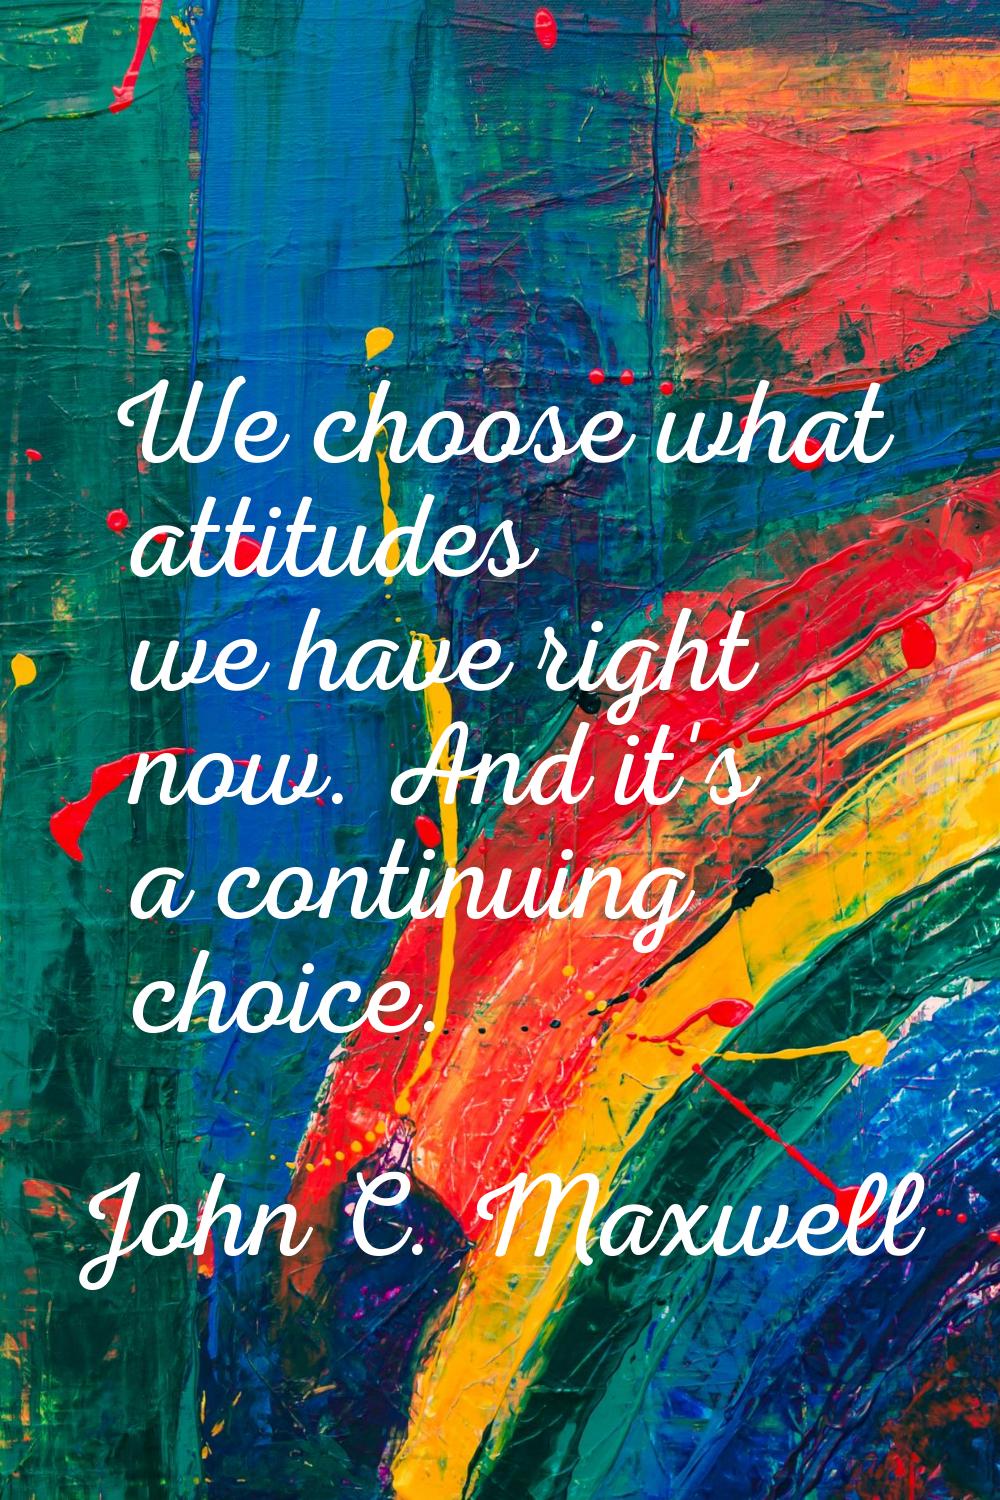 We choose what attitudes we have right now. And it's a continuing choice.